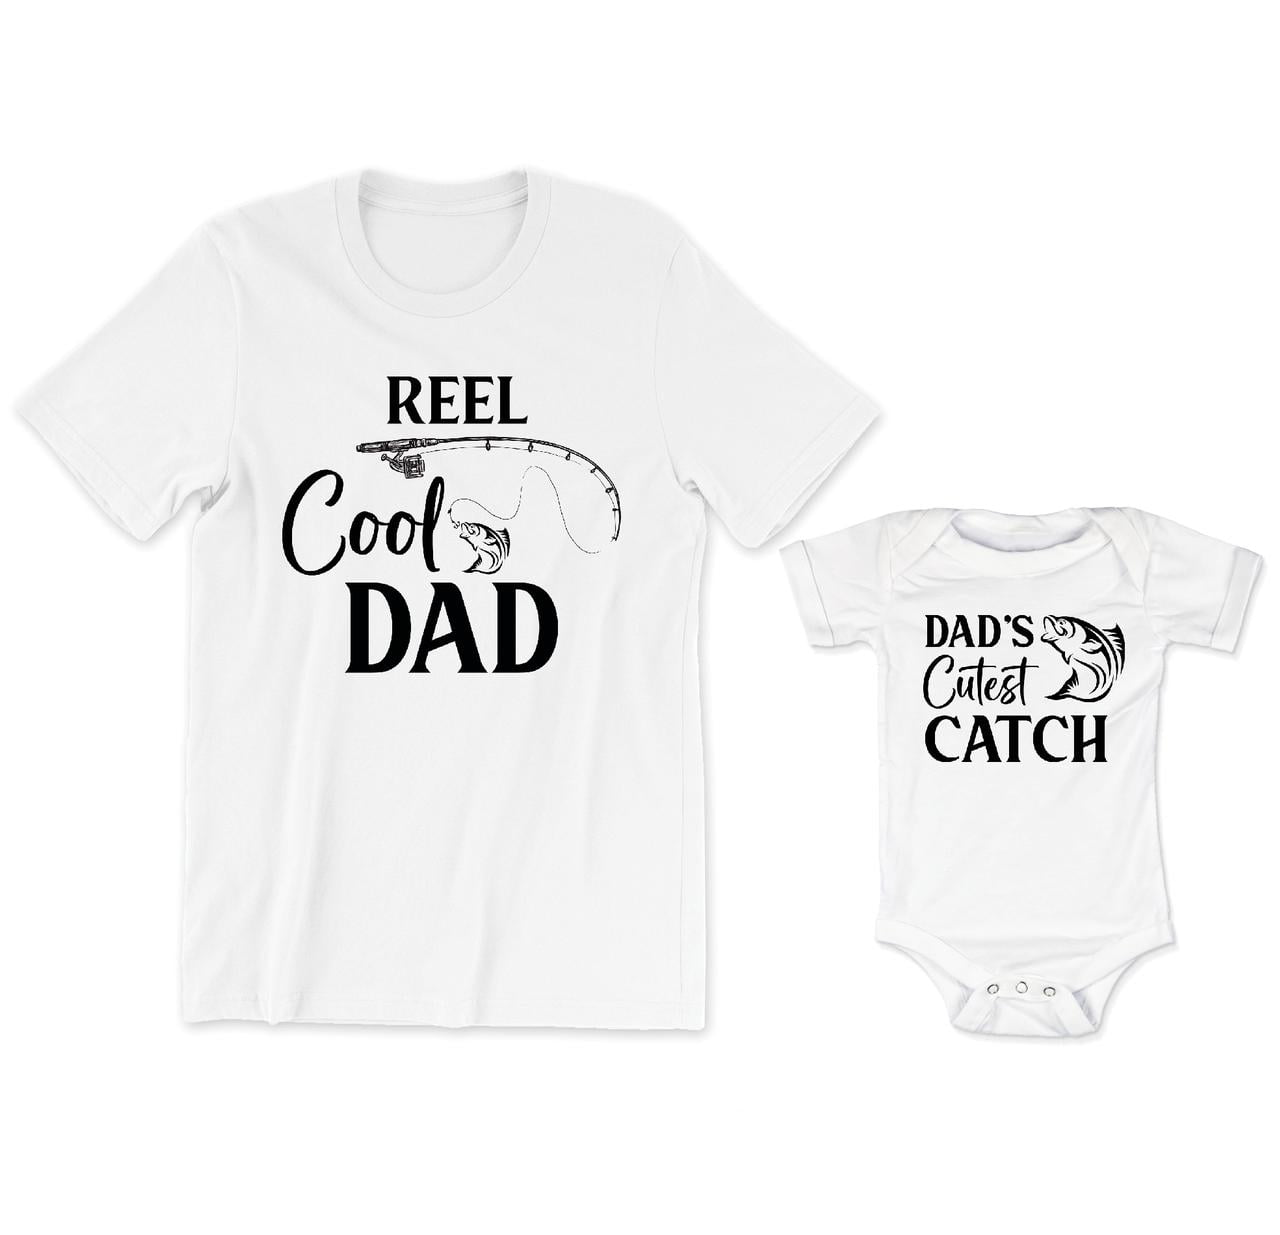 Reel Cool Dad Men's T-Shirt Fish and Fishing Hook Graphic Dad's Cutest ...